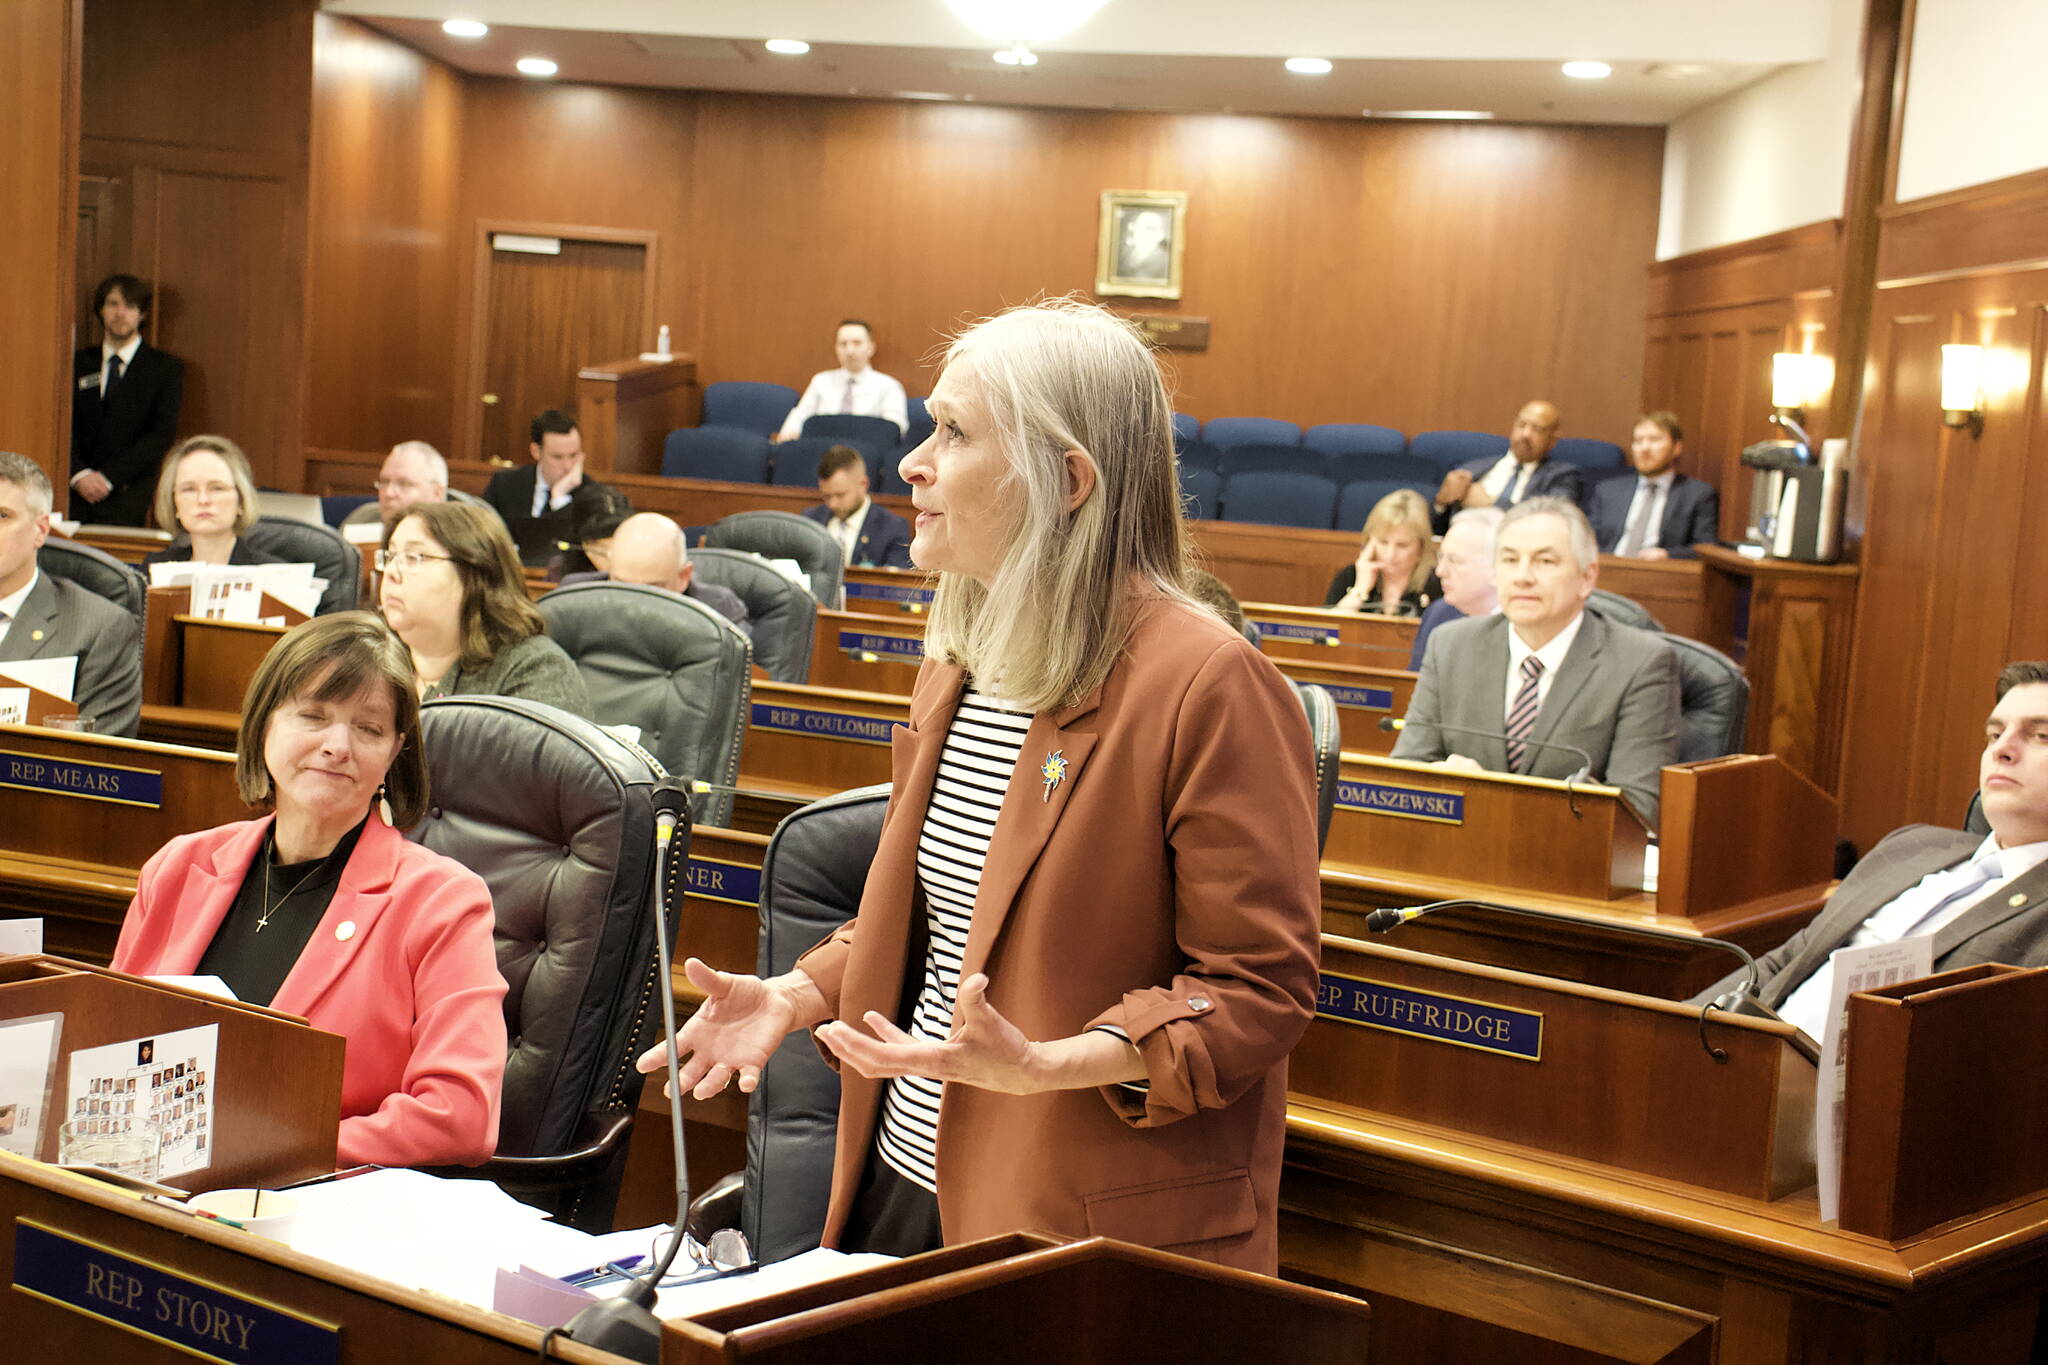 State Rep. Andi Story, D-Juneau, discusses what she considers inadequacies in state education funding during floor debate Monday, April 17, 2023, about the House’s proposed budget for the coming fiscal year. The budget approved by a 23-17 vote will next be considered by the Senate, with a compromise version likely drafted to resolve differences before the end of the session. (Mark Sabbatini / Juneau Empire)